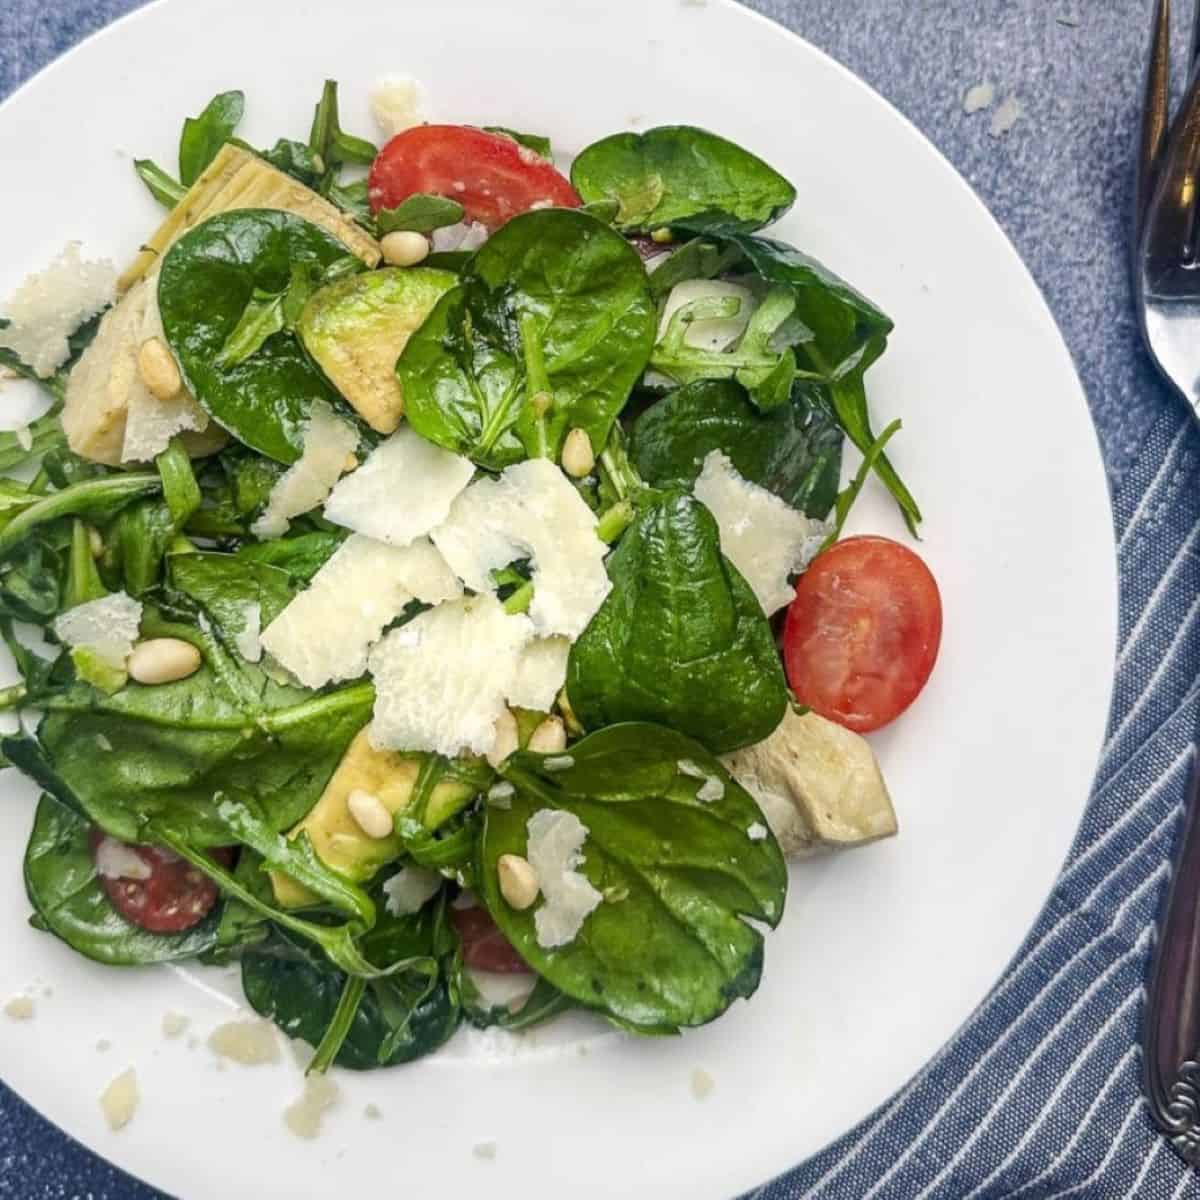 Spinach and Arugula Salad with Shaved Parmesan